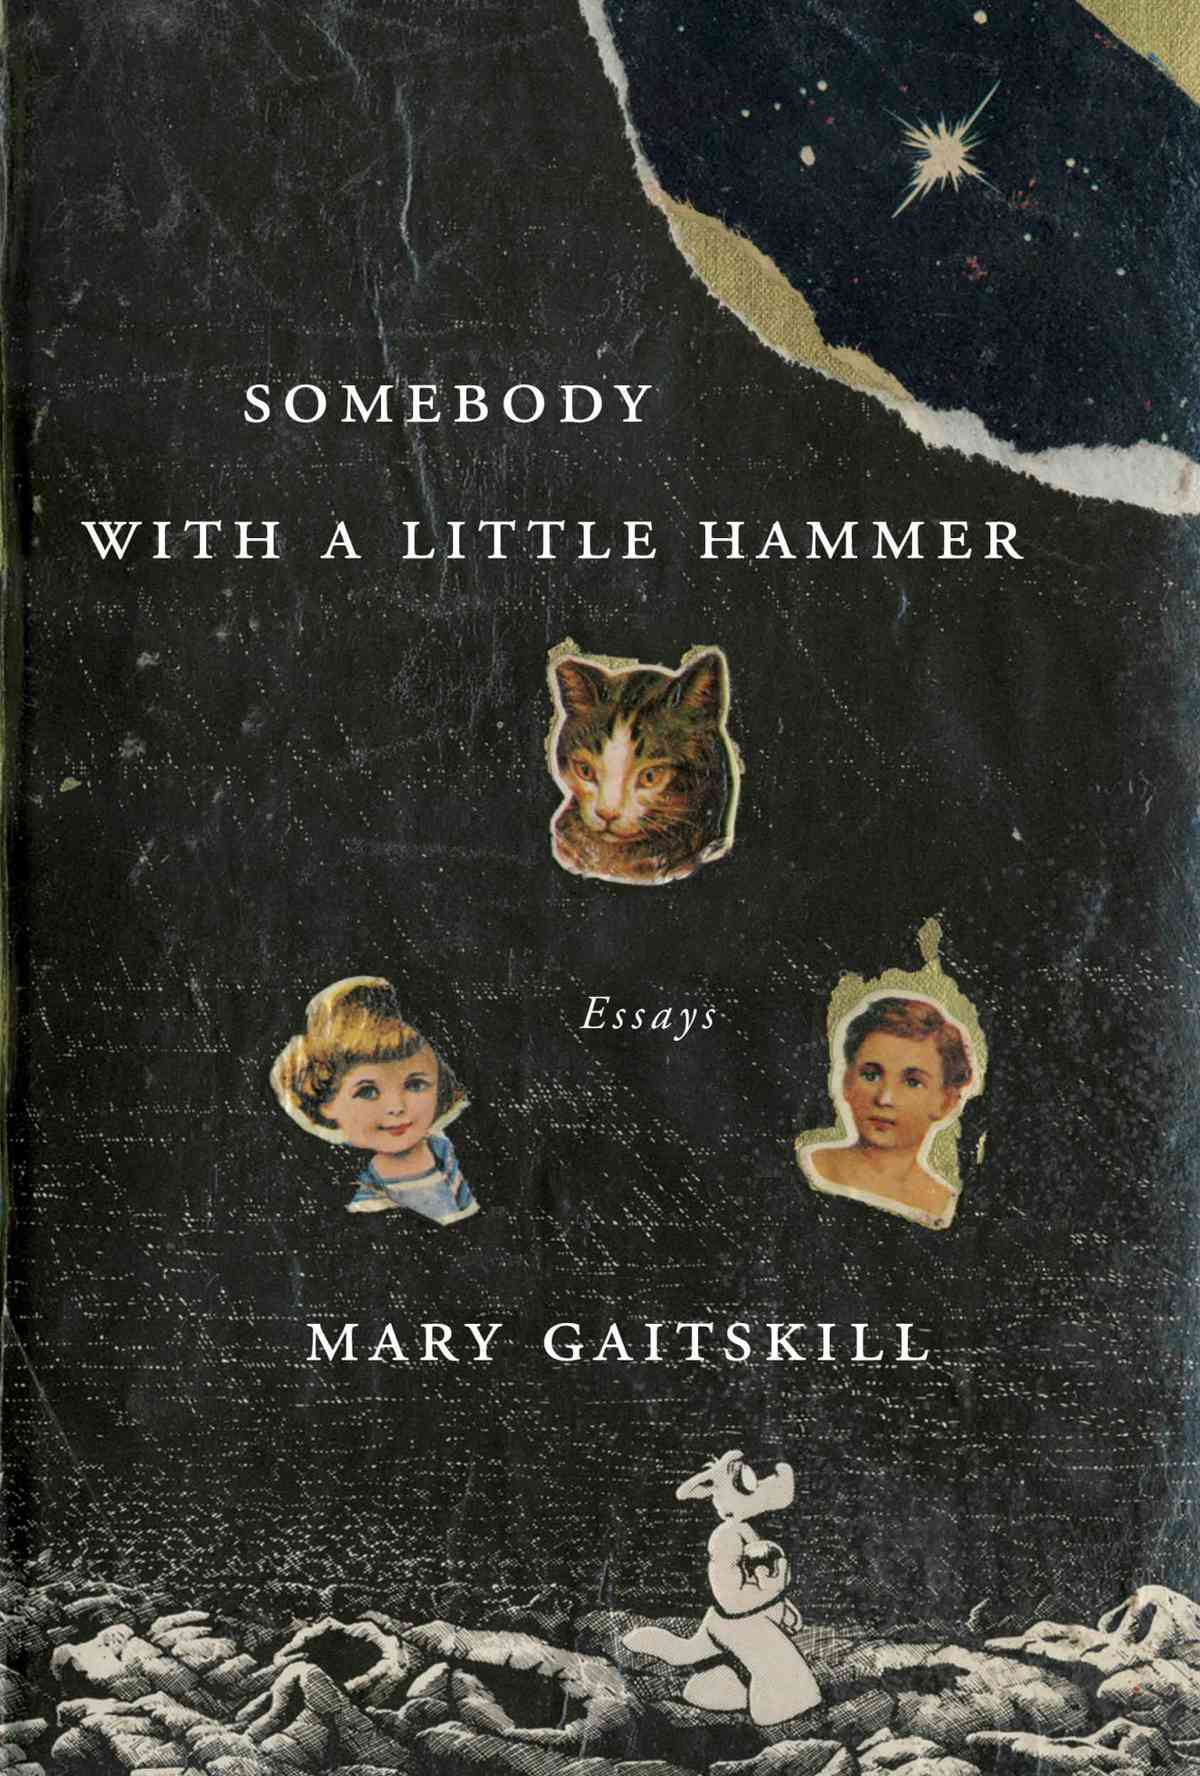 Mary Gaitskill’s Somebody with a Little Hammer